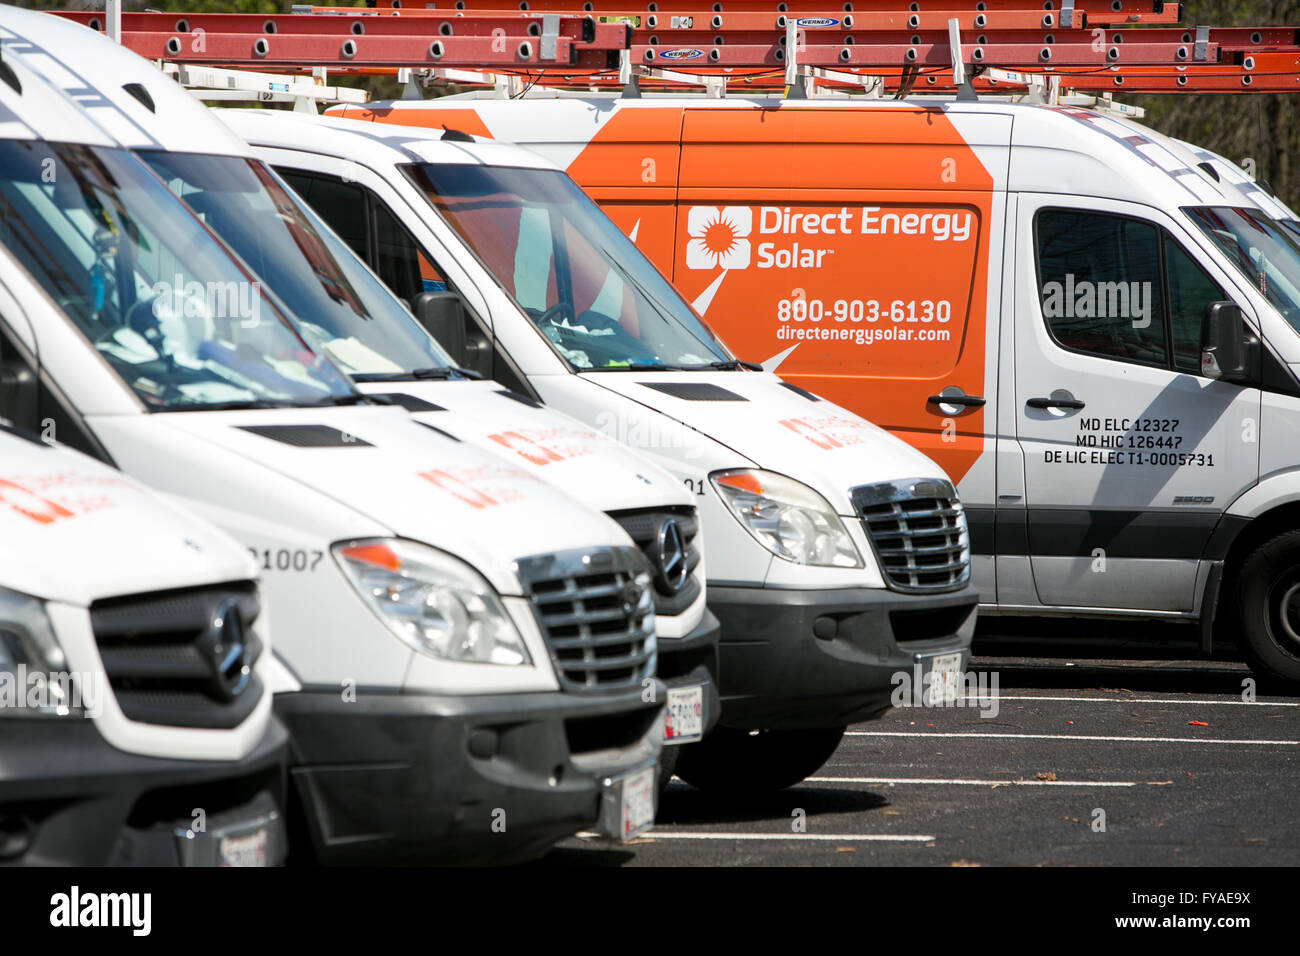 Work vans featuring Direct Energy Solar logos in Columbia, Maryland on April 10, 2016. Stock Photo